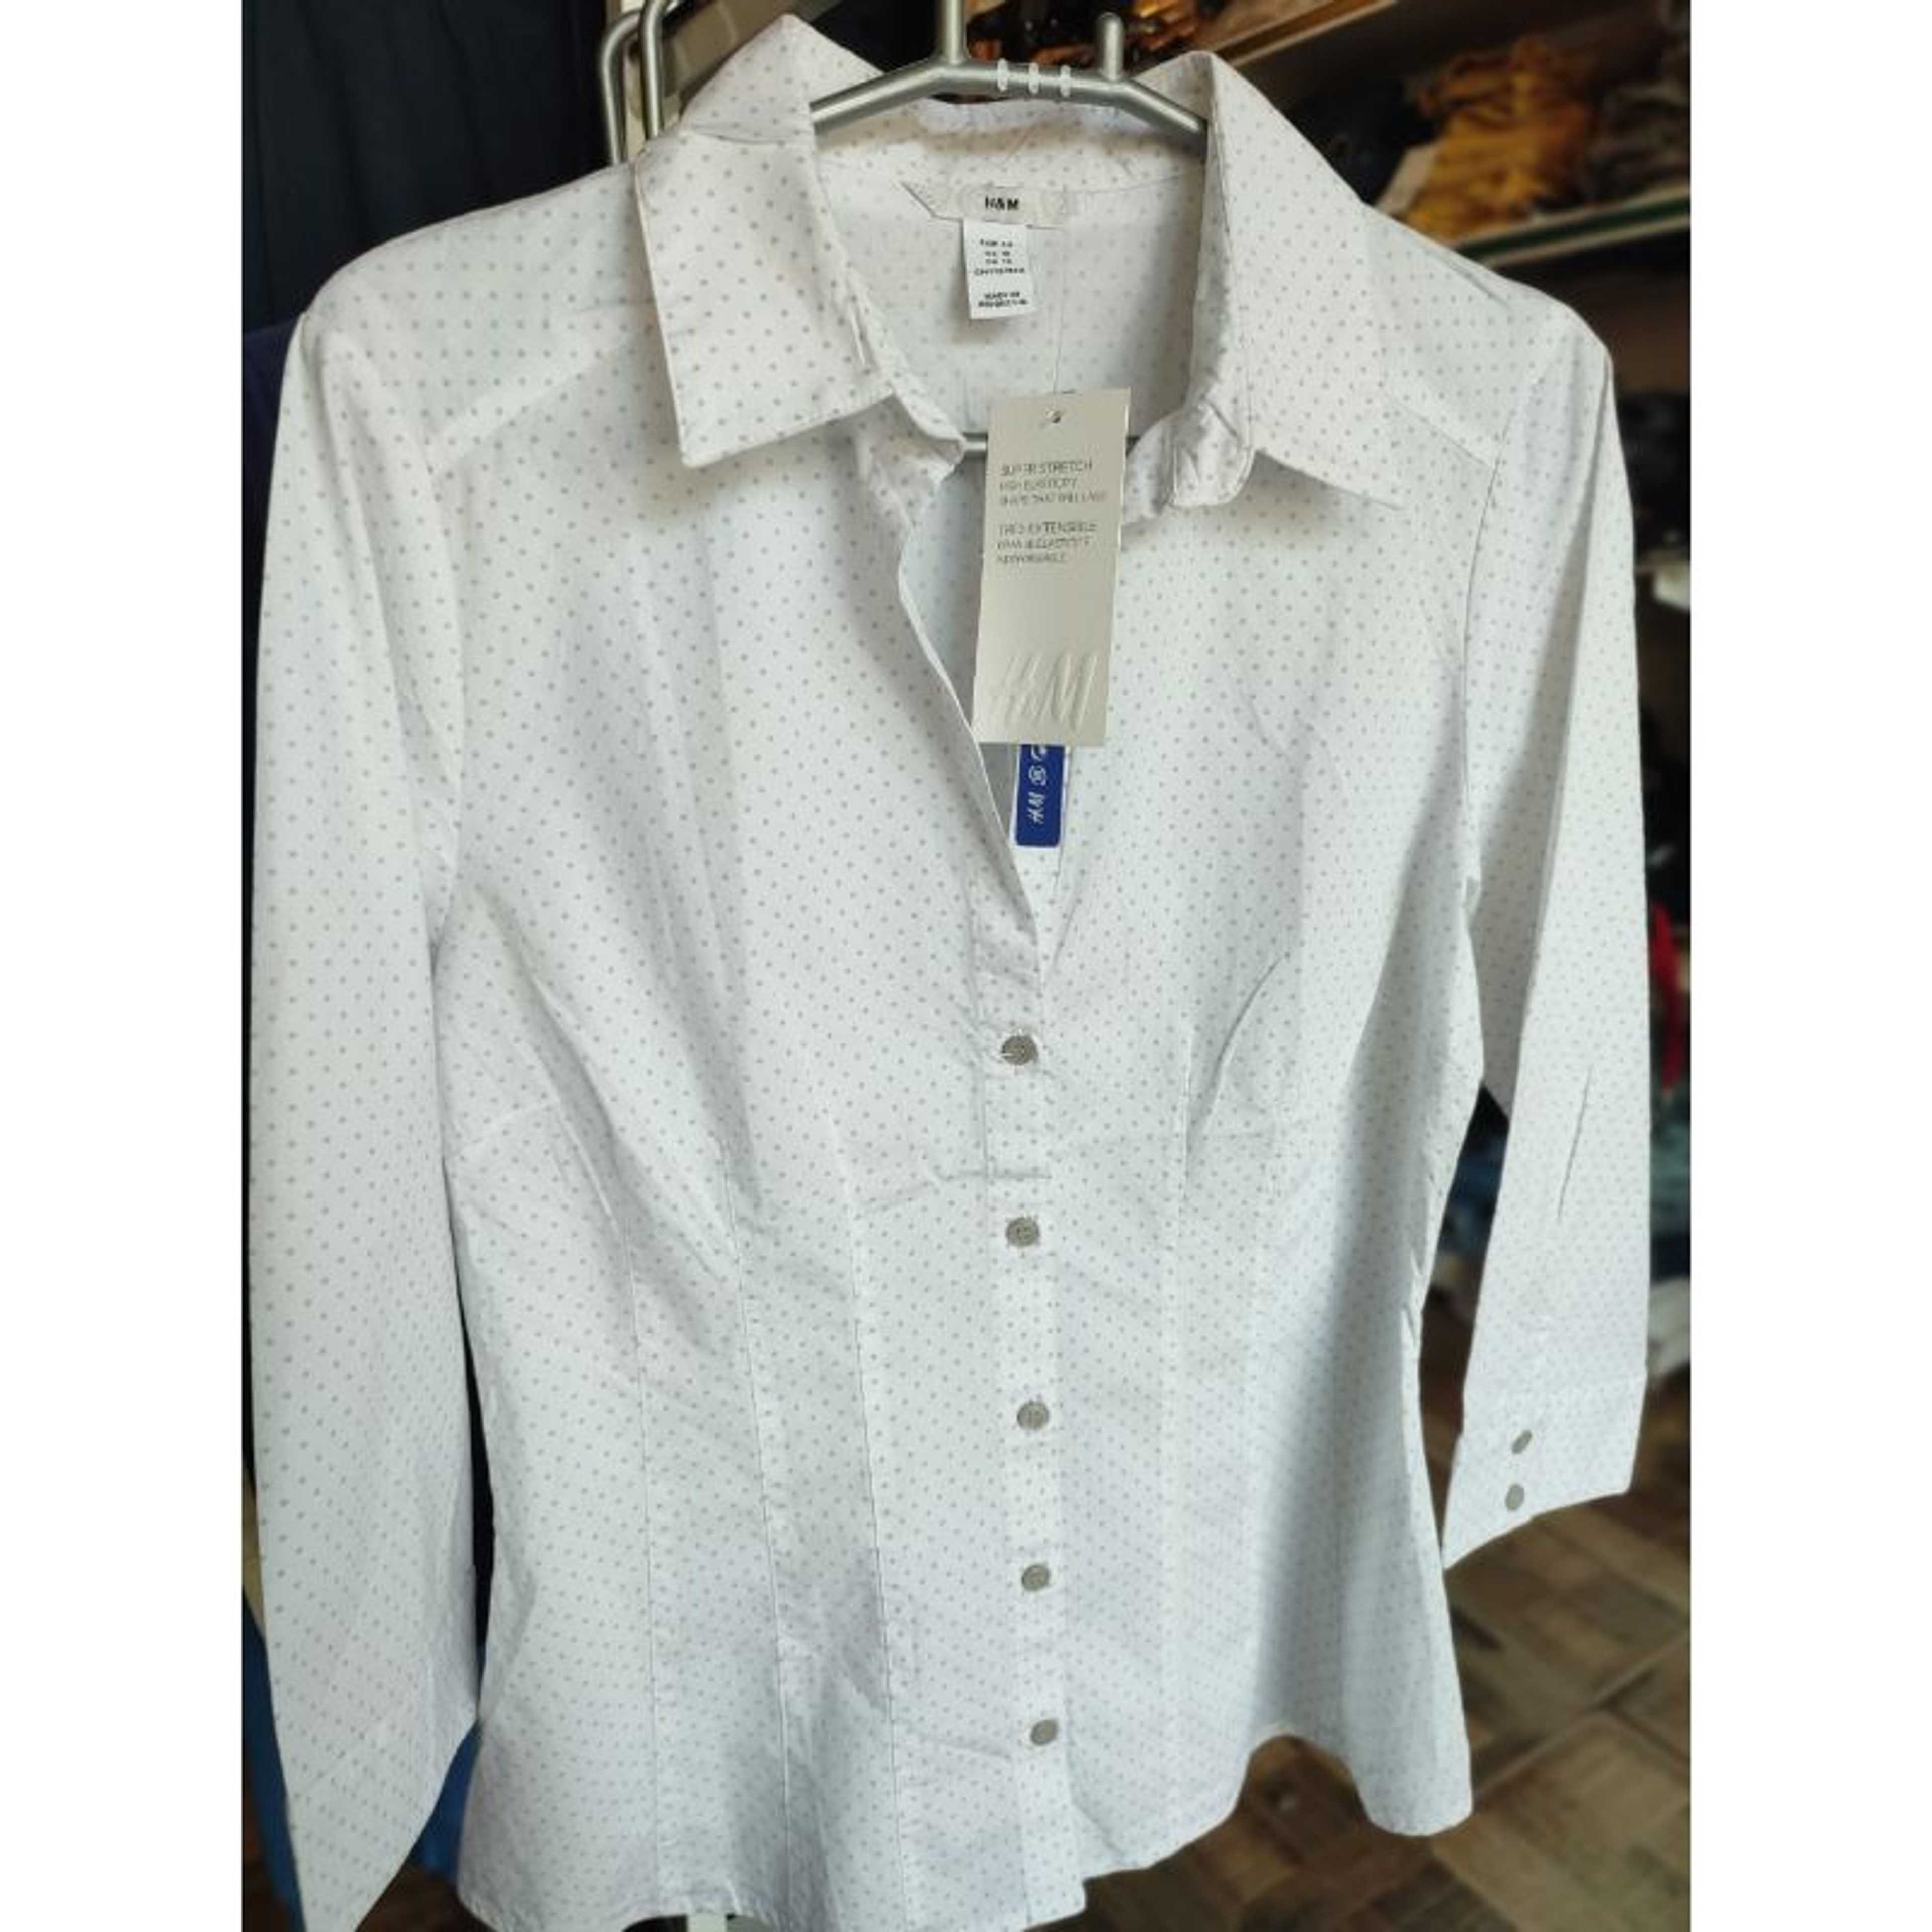 Girls formal shirts in White color